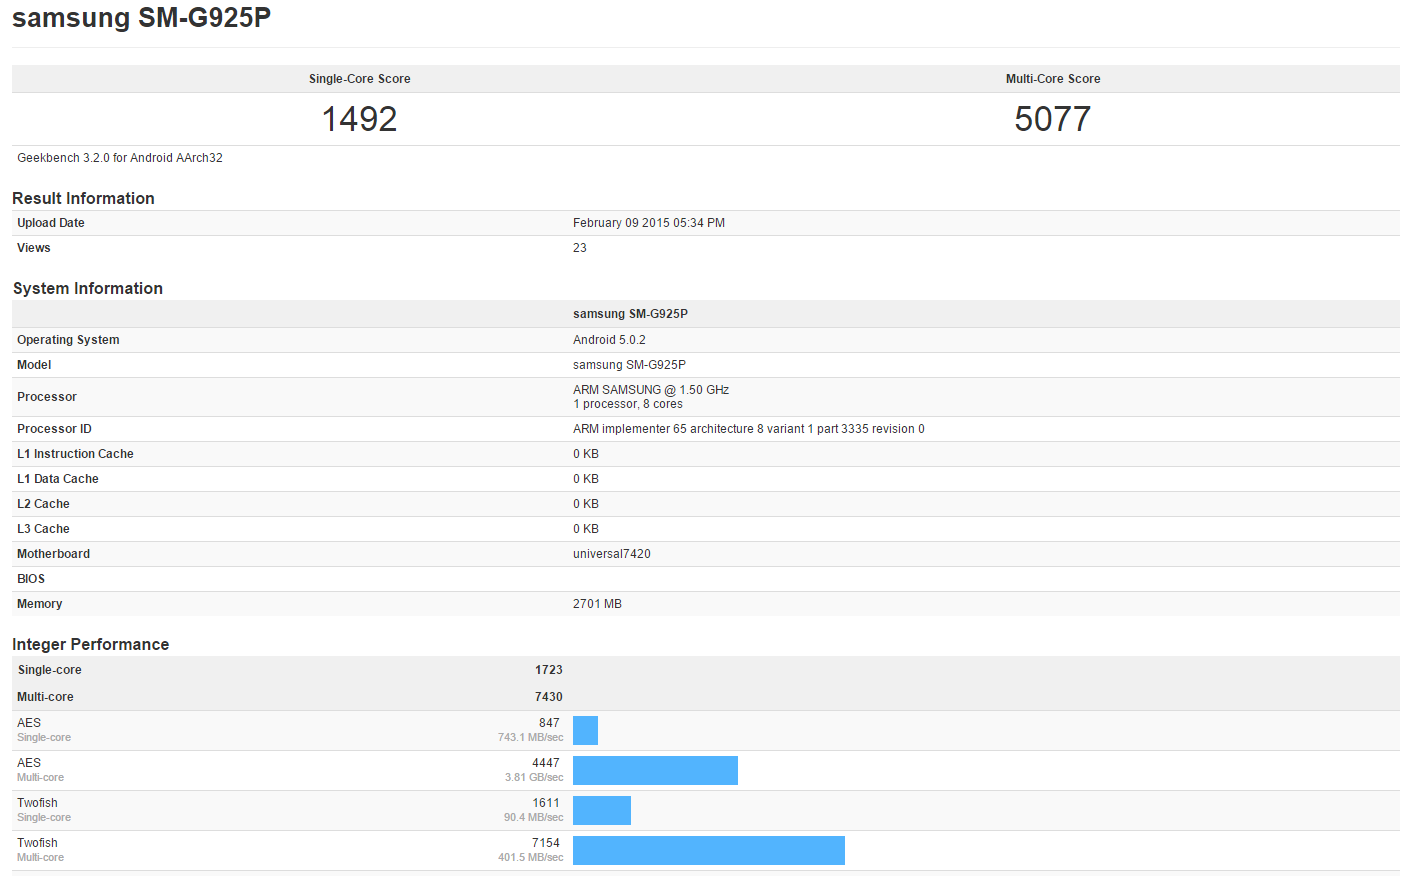 Galaxy S6 Edge multi-core Geekbench score crushes everything, including the iPad Air 2